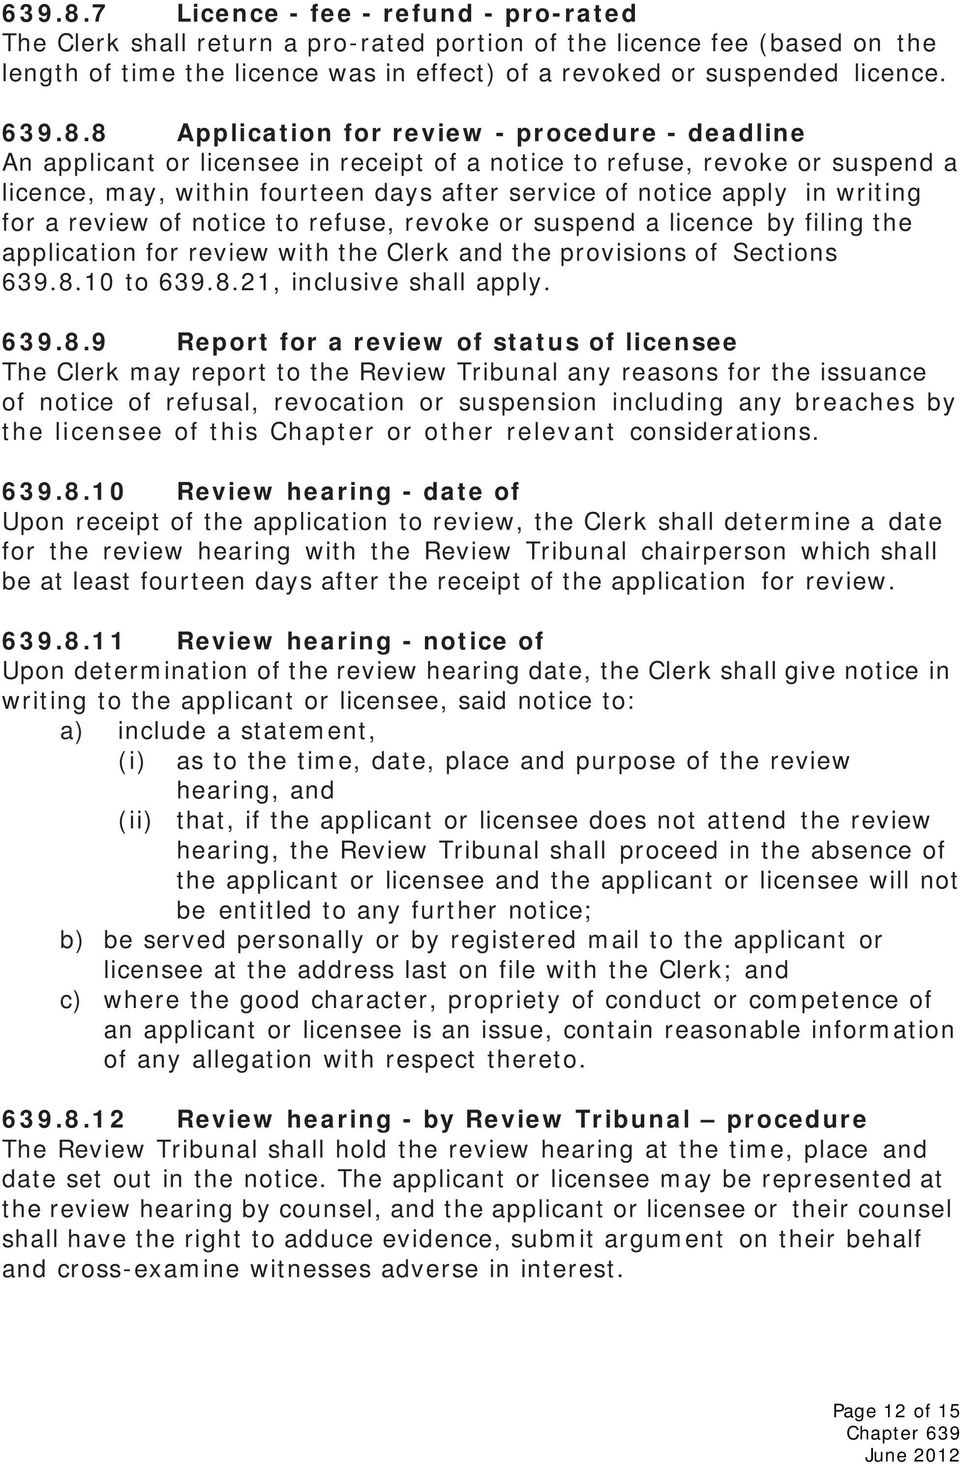 writing for a review of notice to refuse, revoke or suspend a licence by filing the application for review with the Clerk and the provisions of Sections 639.8.10 to 639.8.21, inclusive shall apply.